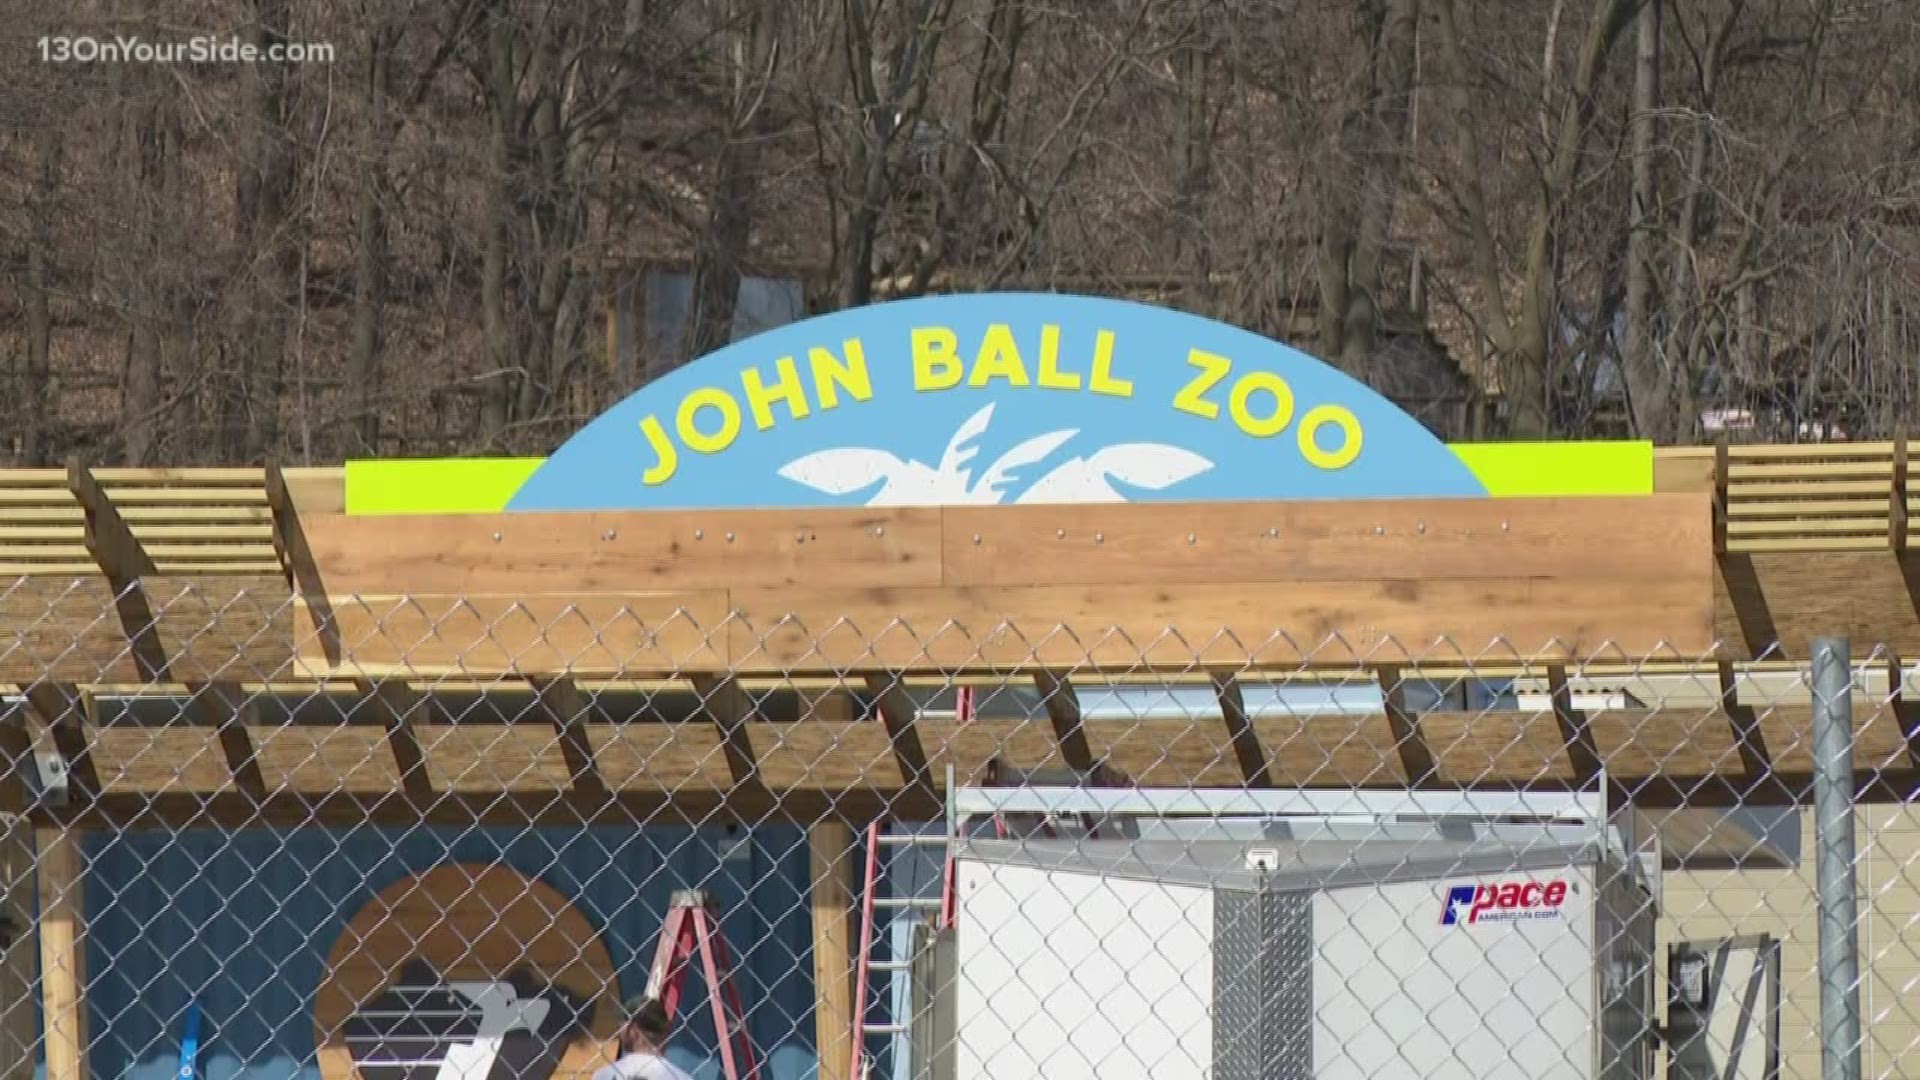 As a result, the zoo has been forced to pause seasonal hiring and facility improvements, as well as cancel some camps and educational programs.